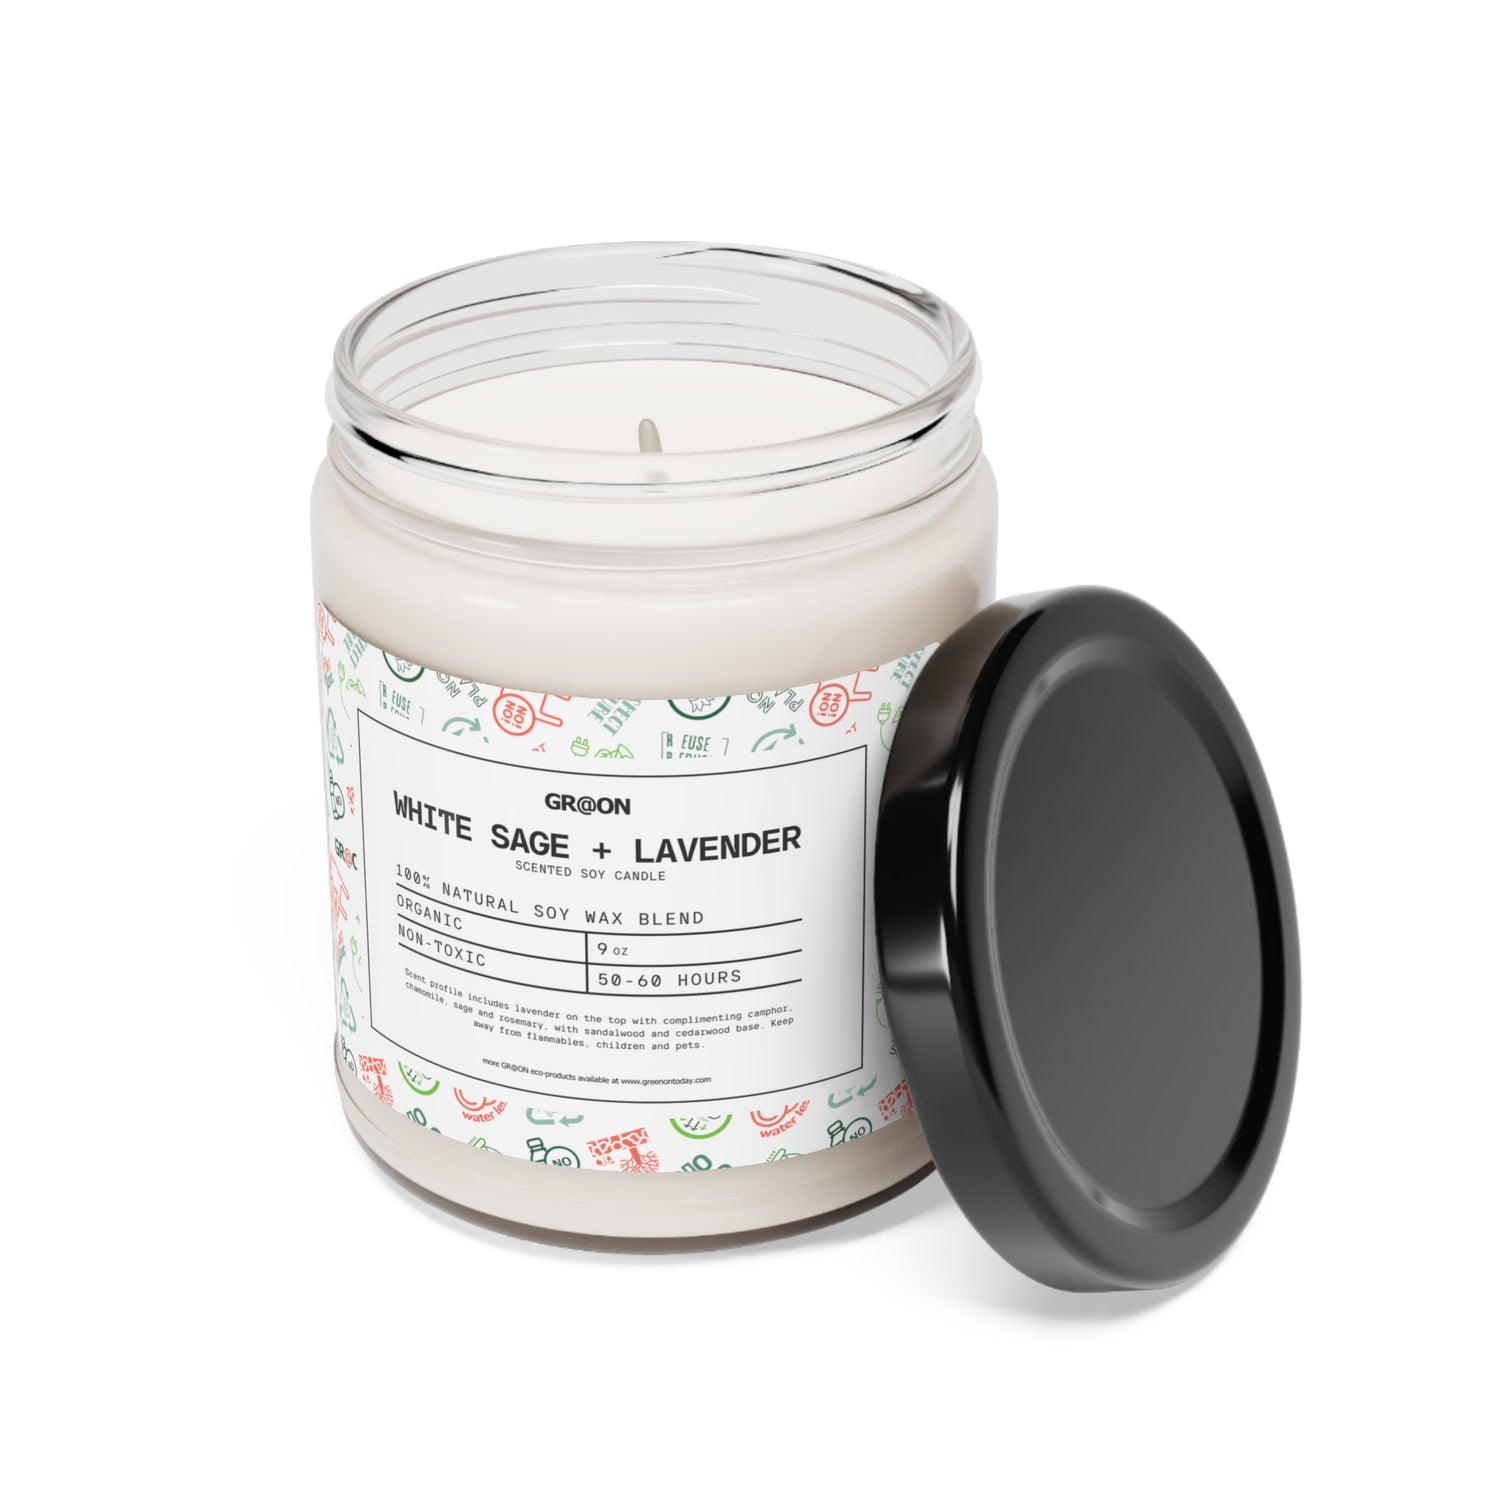 Burning GR@ON Scented Candle in a glass jar, filling the room with a calming lavender scent. GR@ON Scented Candles: Eco-friendly aromas, sustainable scents.